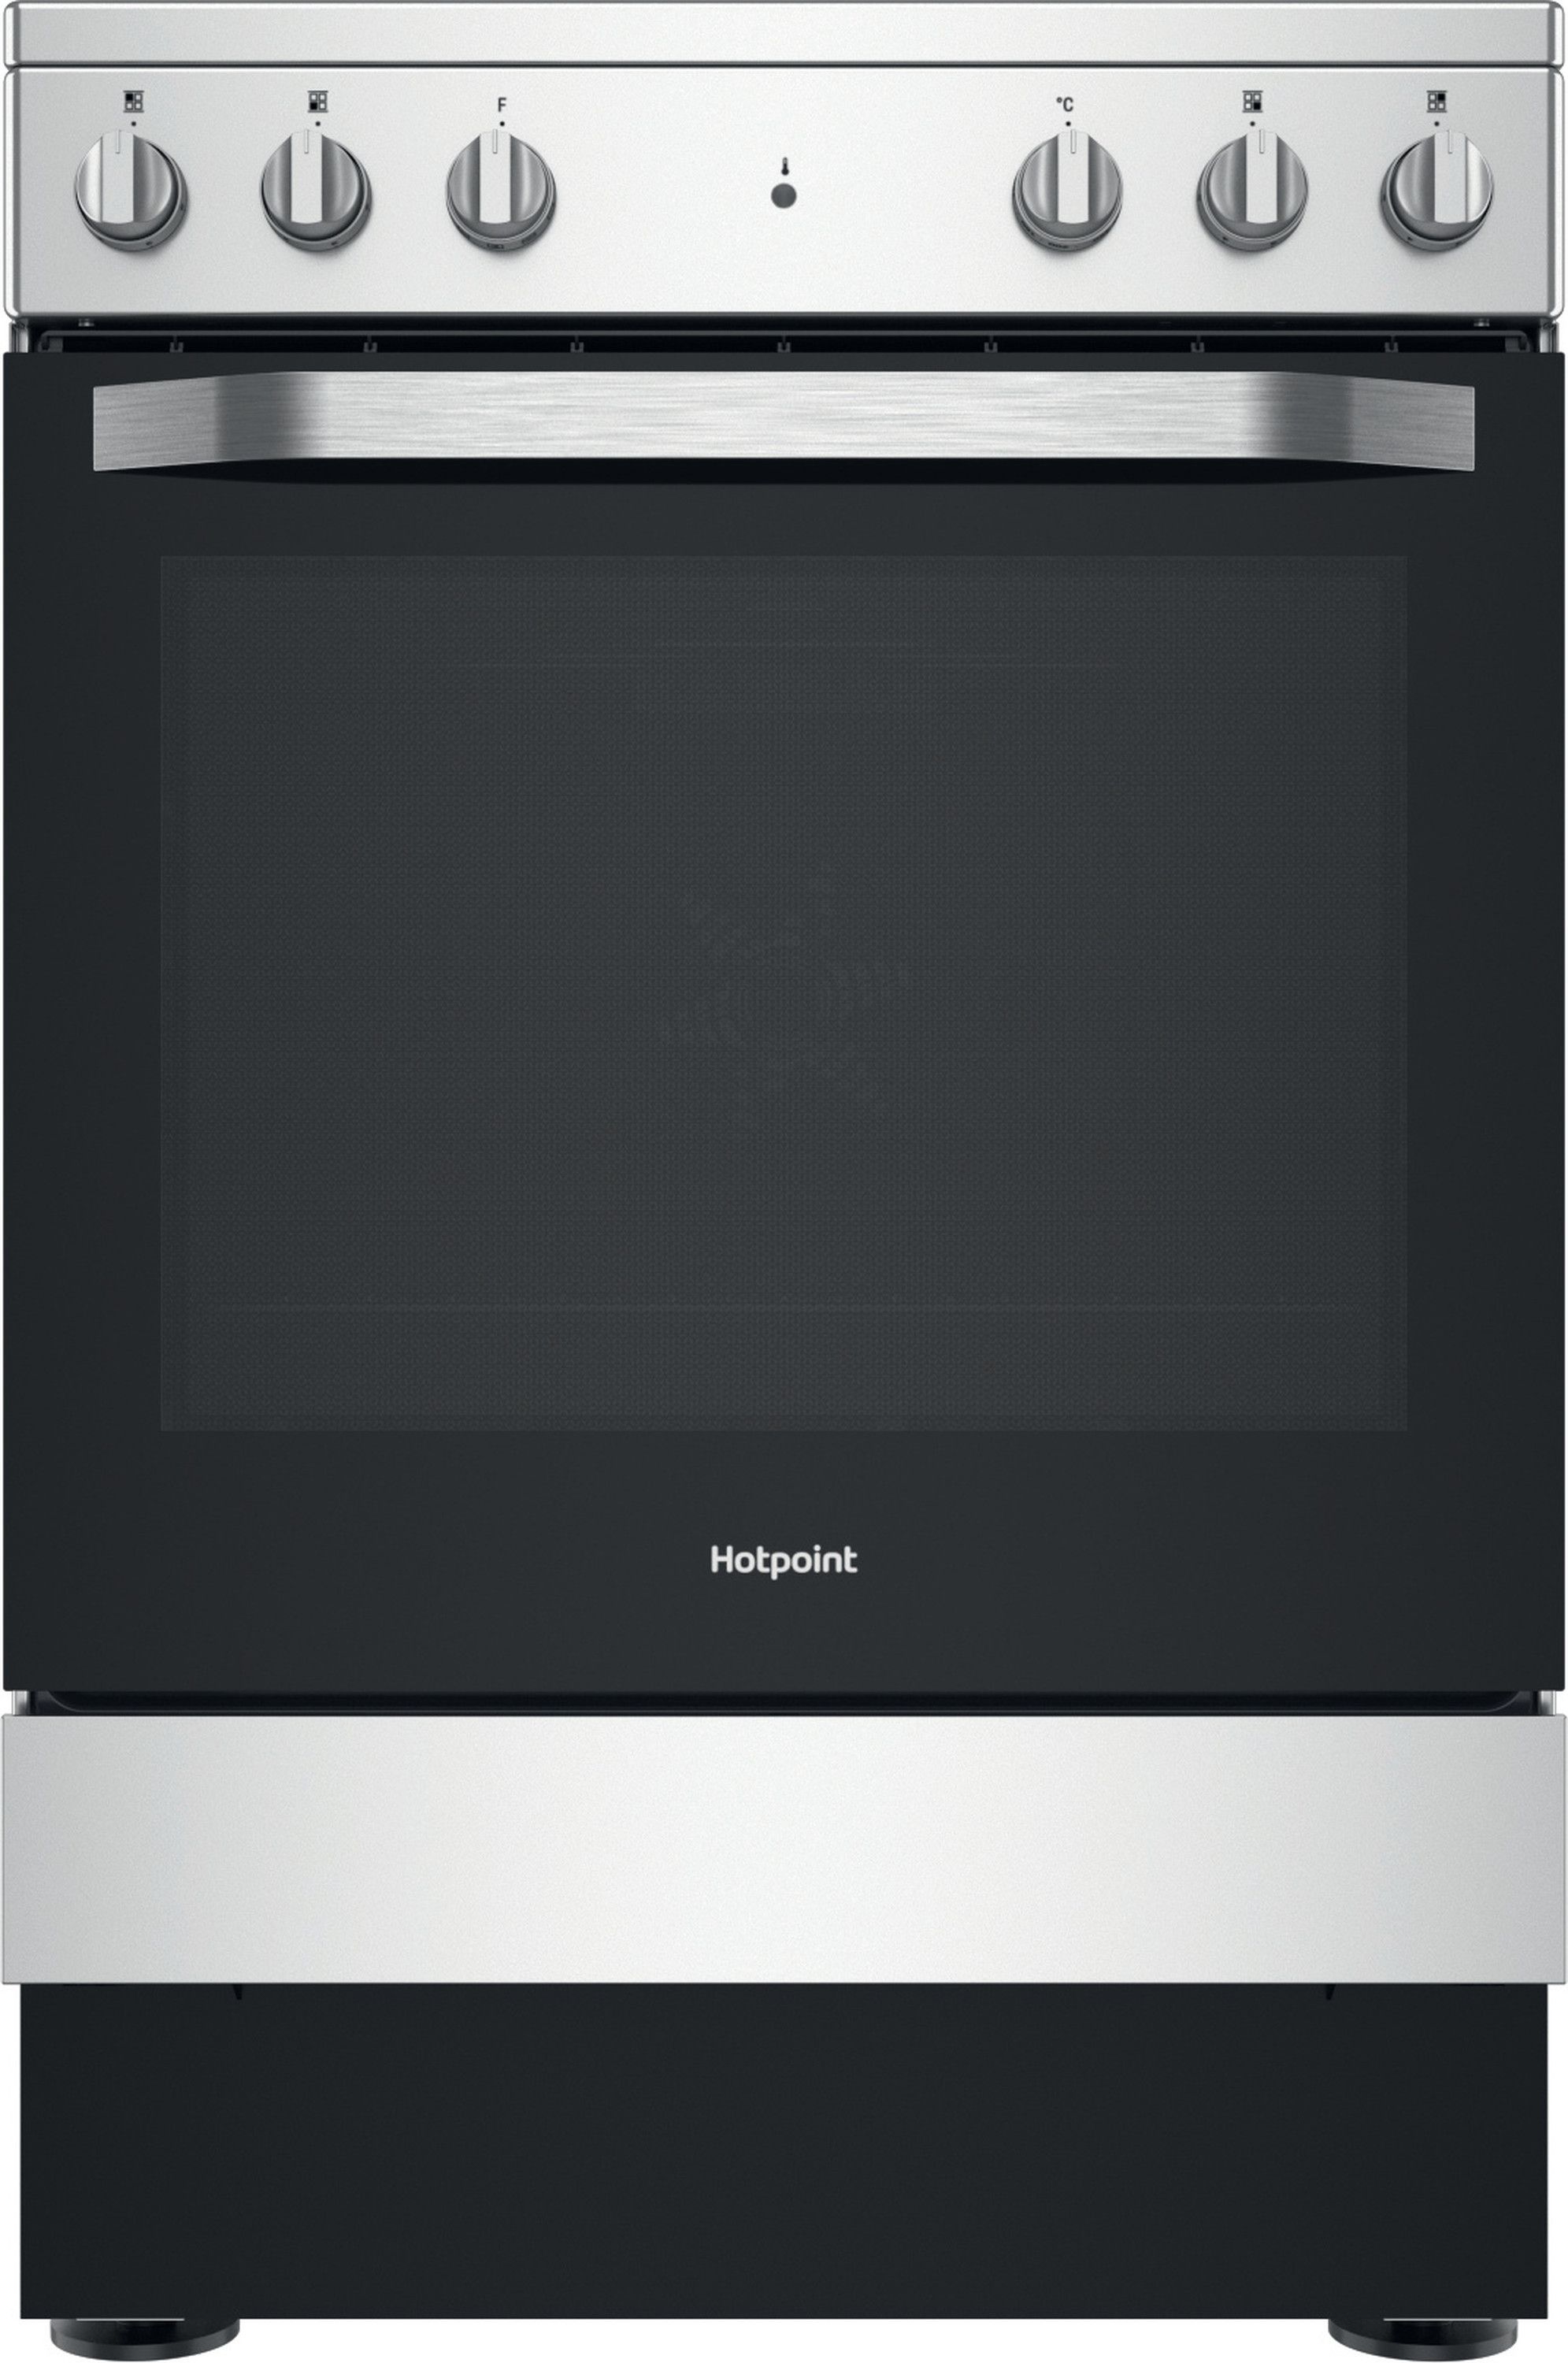 Hotpoint HS67V5KHX/UK 60cm Electric Cooker with Ceramic Hob - Inox - A Rated, Stainless Steel